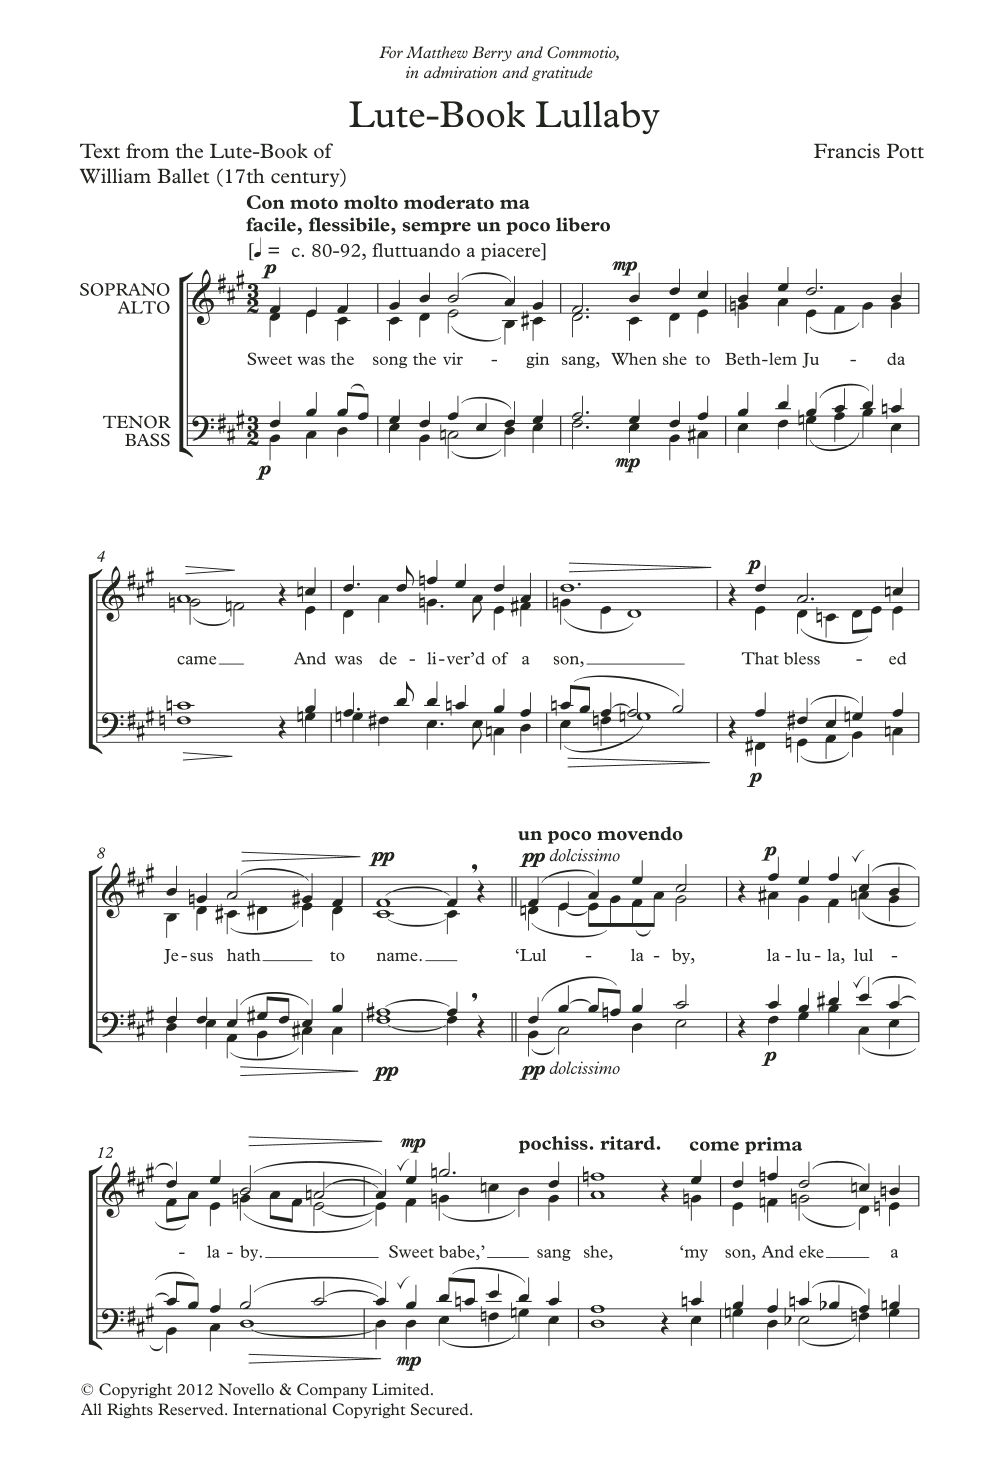 Download Francis Pott Lute-Book Lullaby Sheet Music